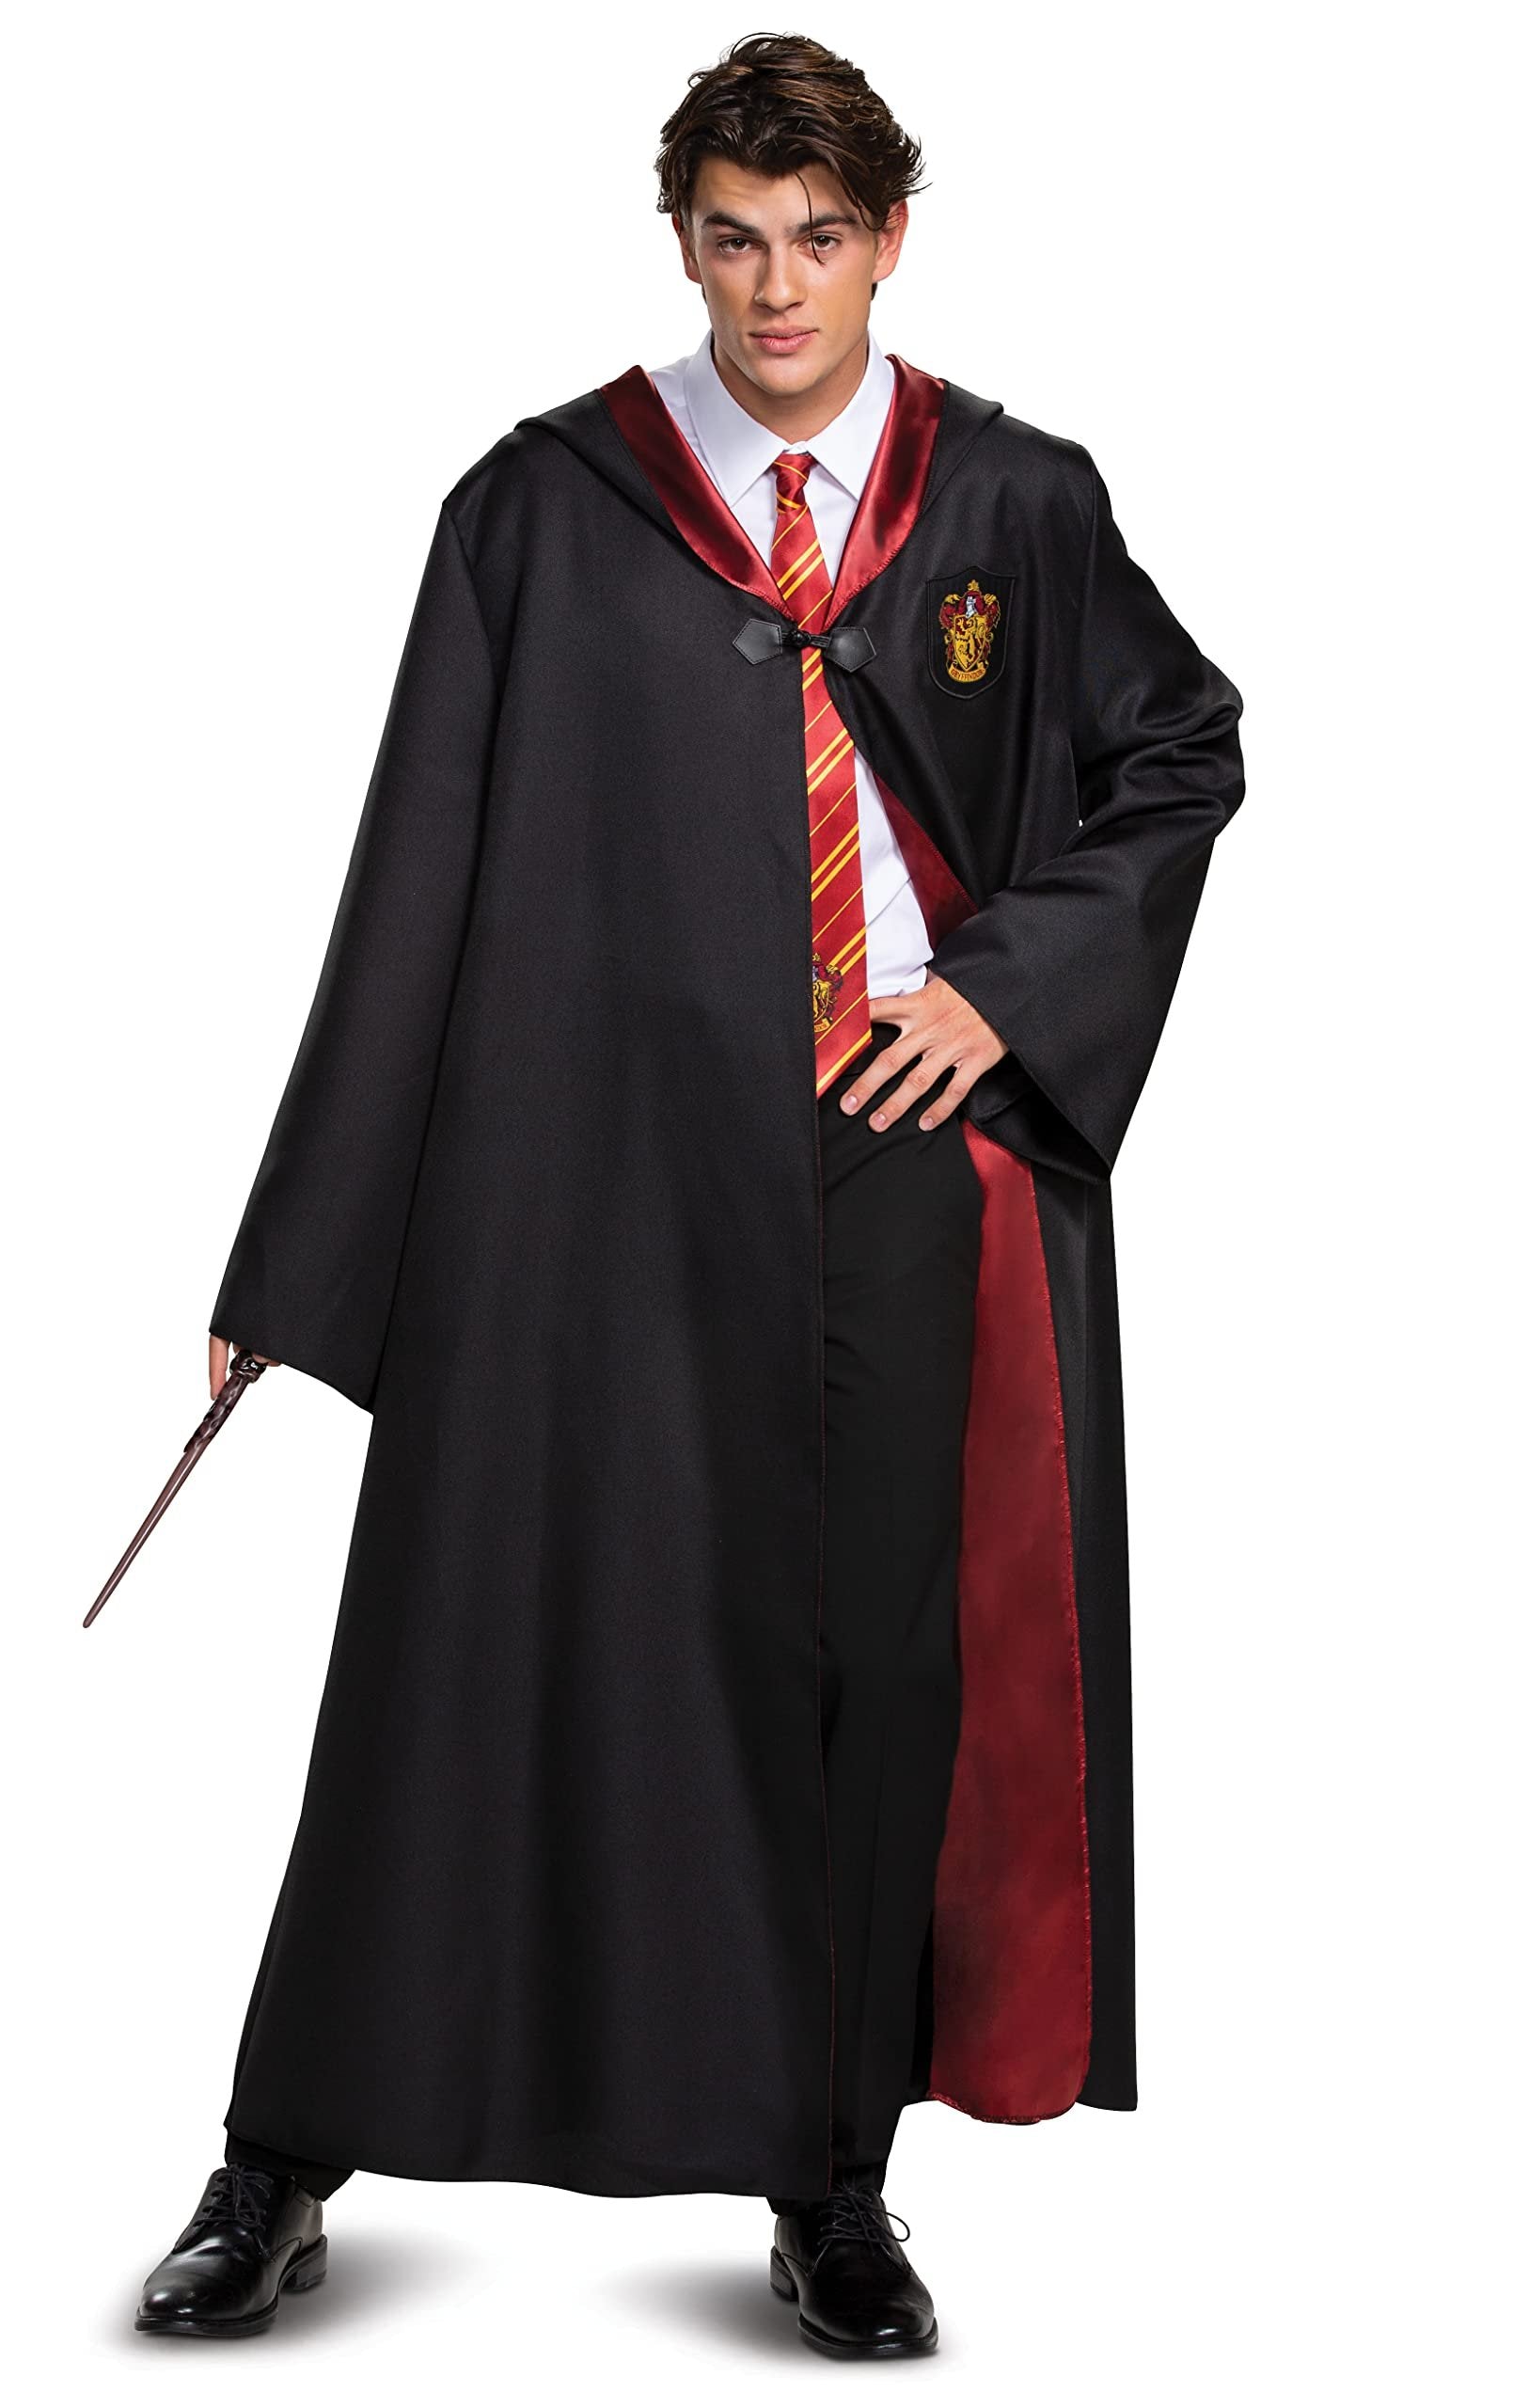 Disguise Harry Potter Gryffindor Costume Combo, Deluxe Hooded Robe with Tie for Adults, As Shown, Large (42-46)